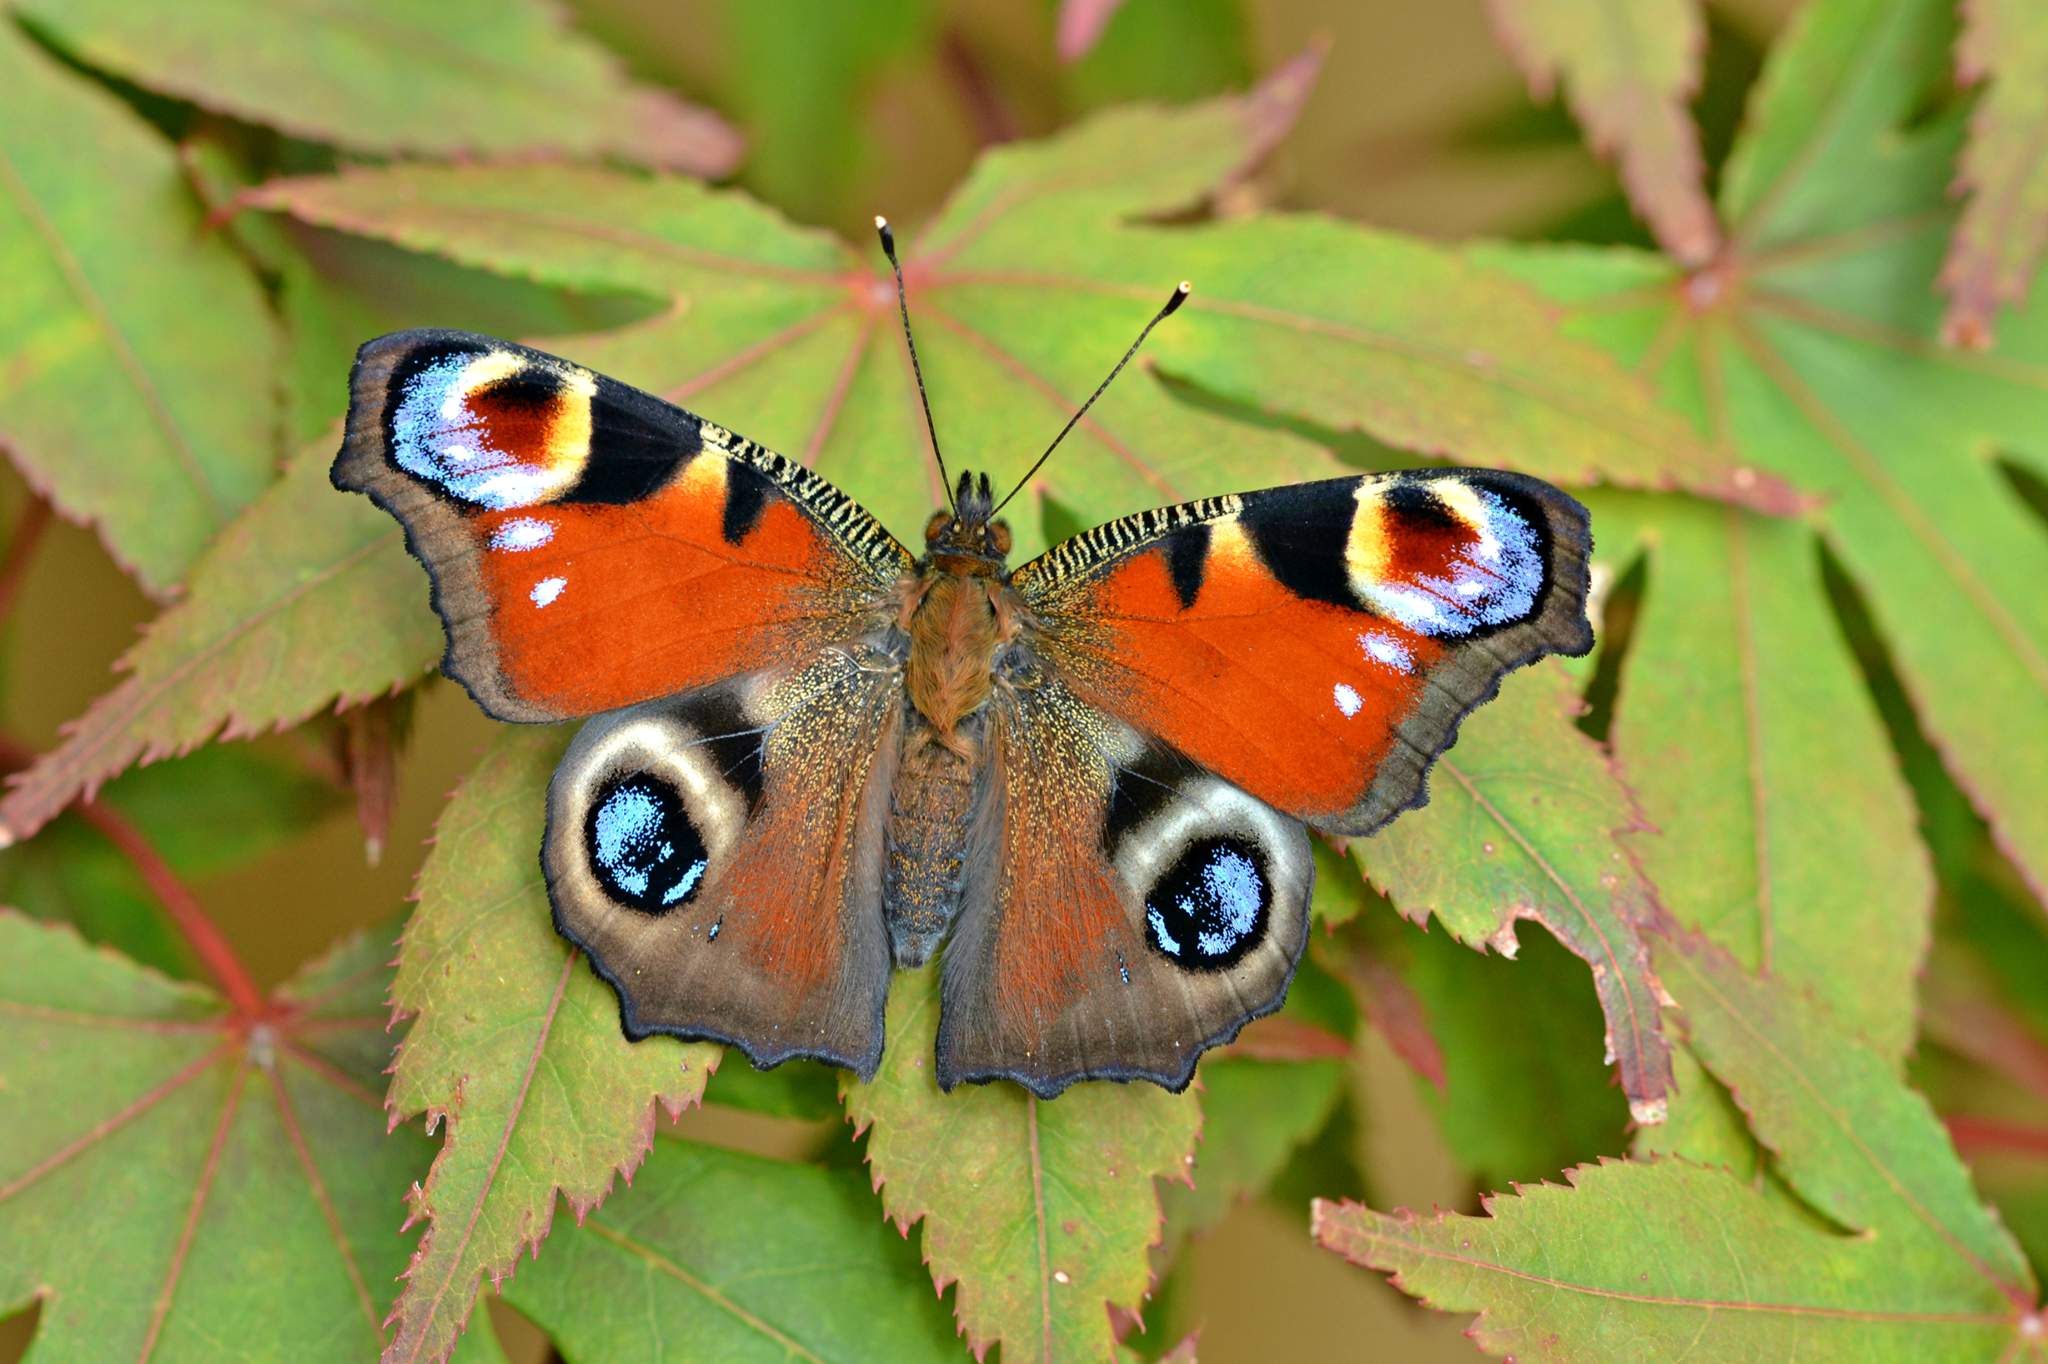 The European peacock, aka the peacock butterfly, is a colourful butterfly on a green leaf